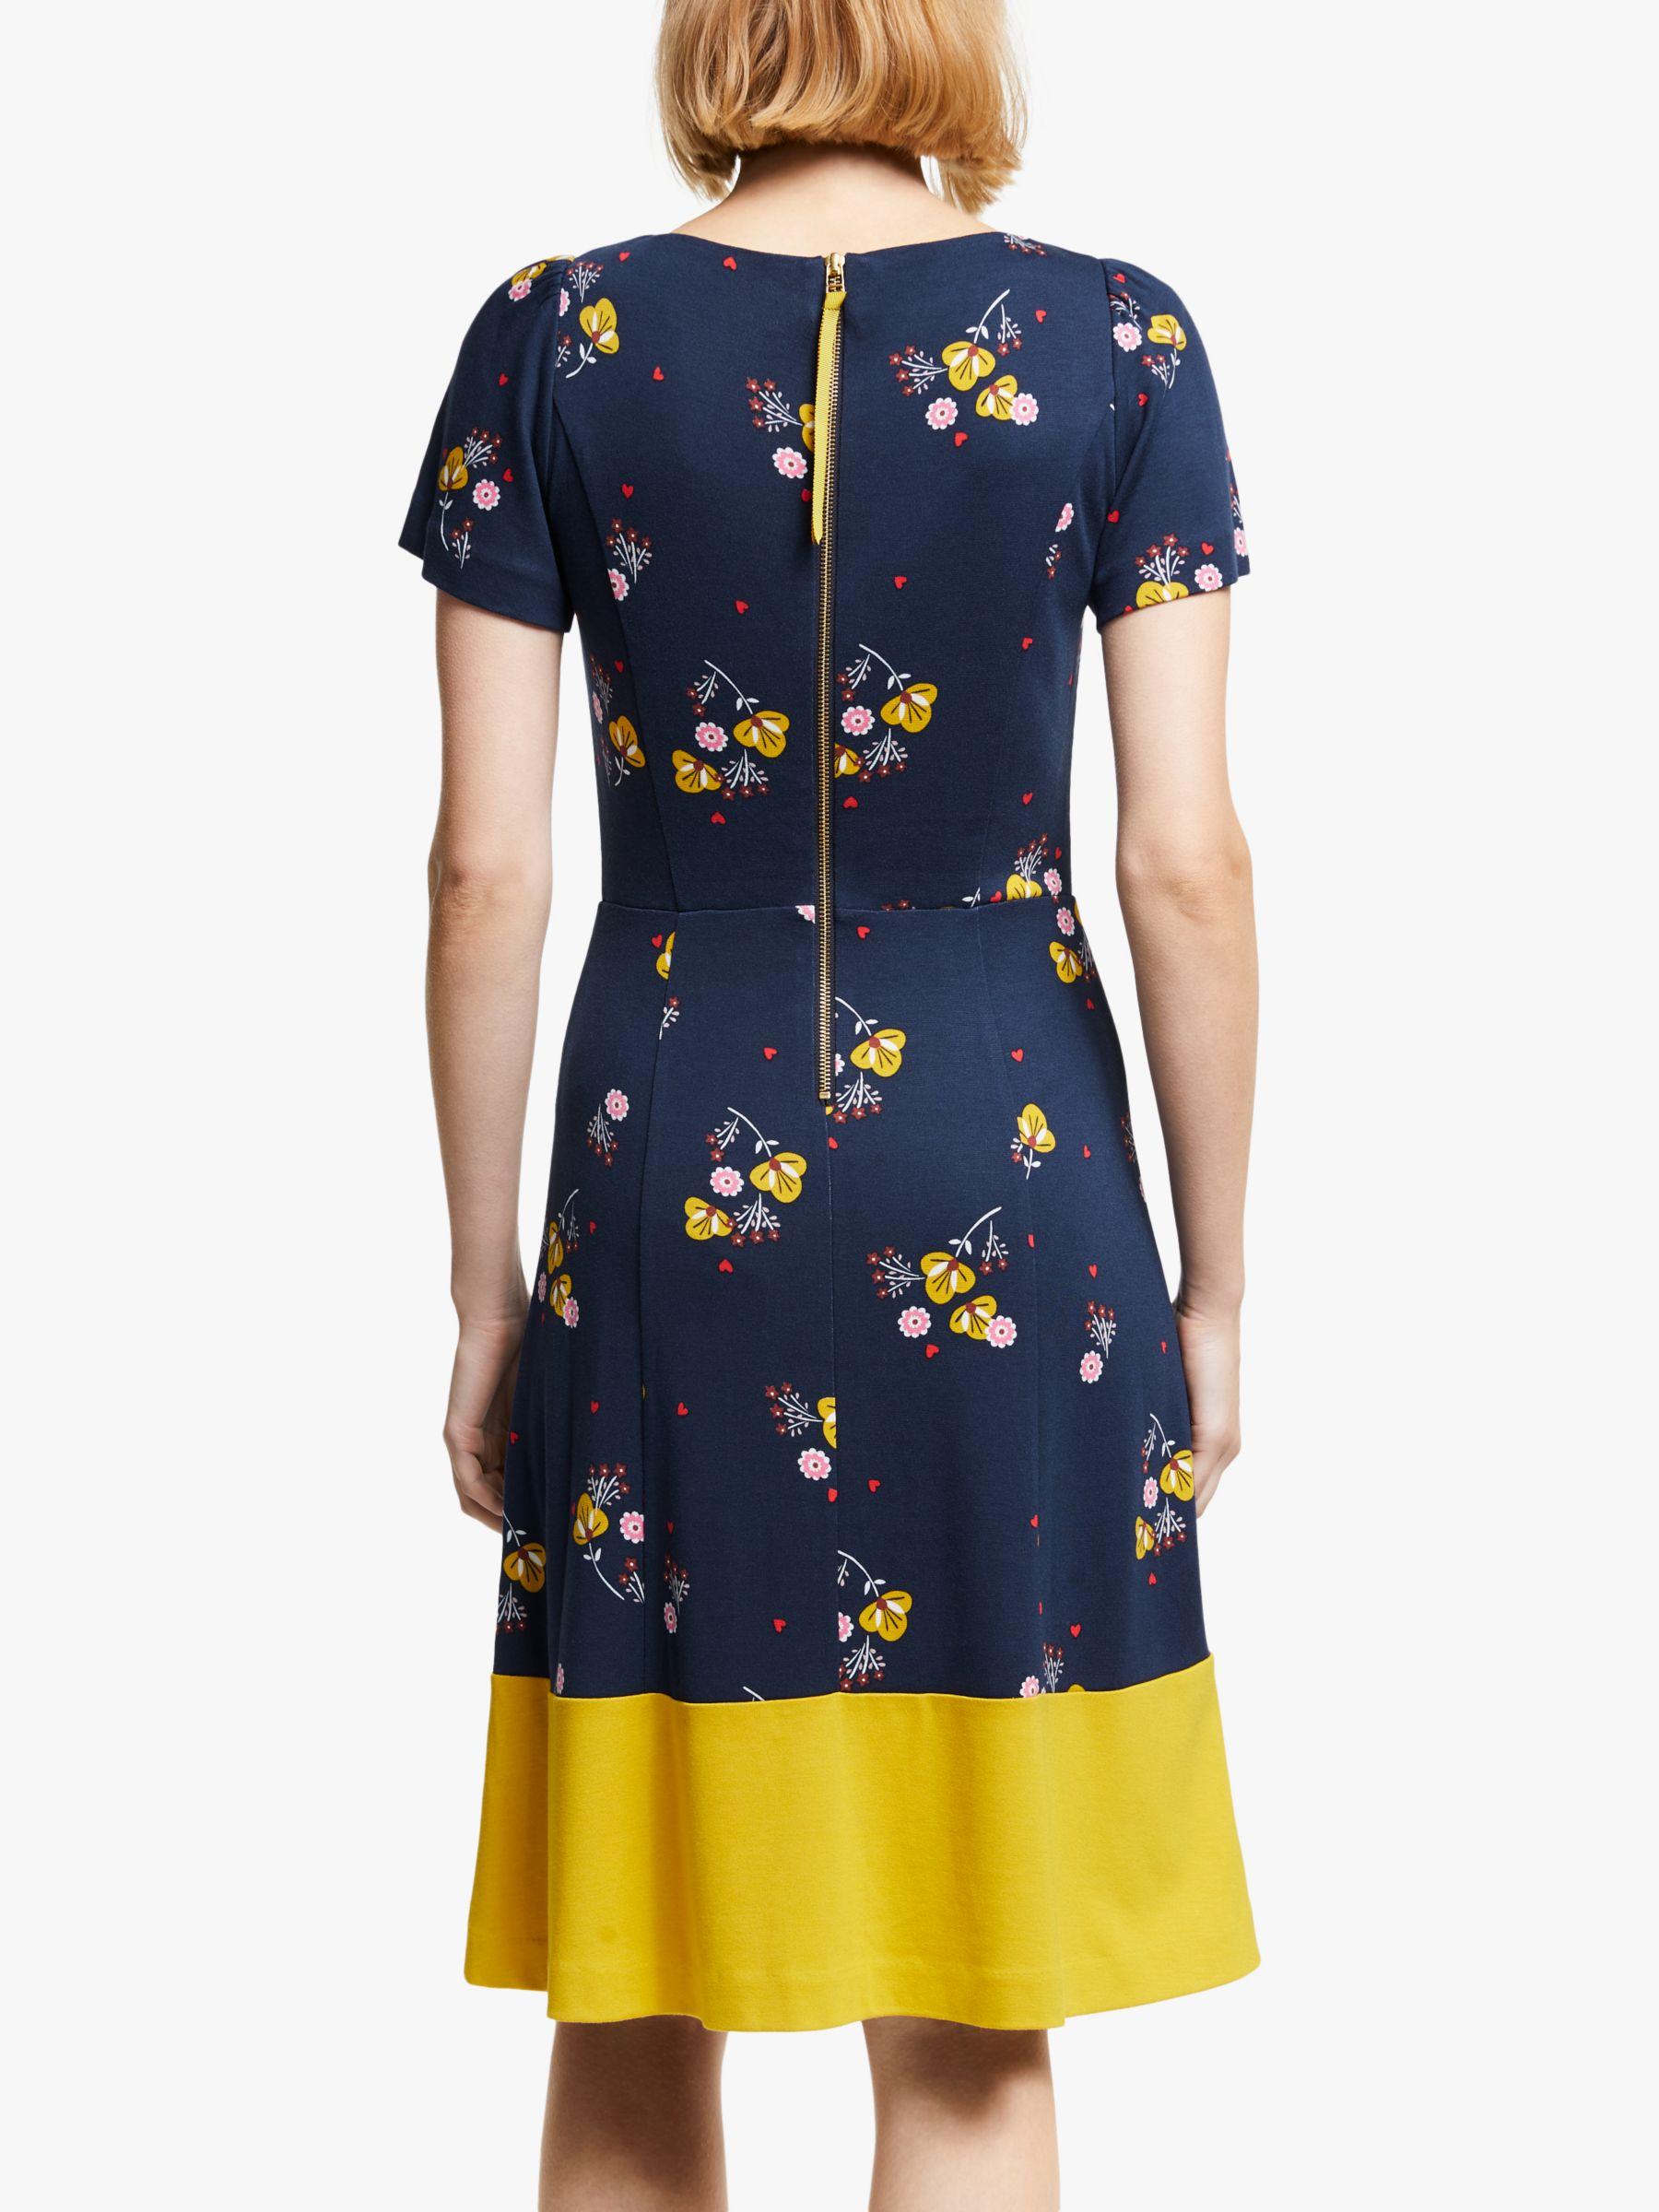 Boden Synthetic Erica Ponte Dress in Navy (Blue) - Lyst